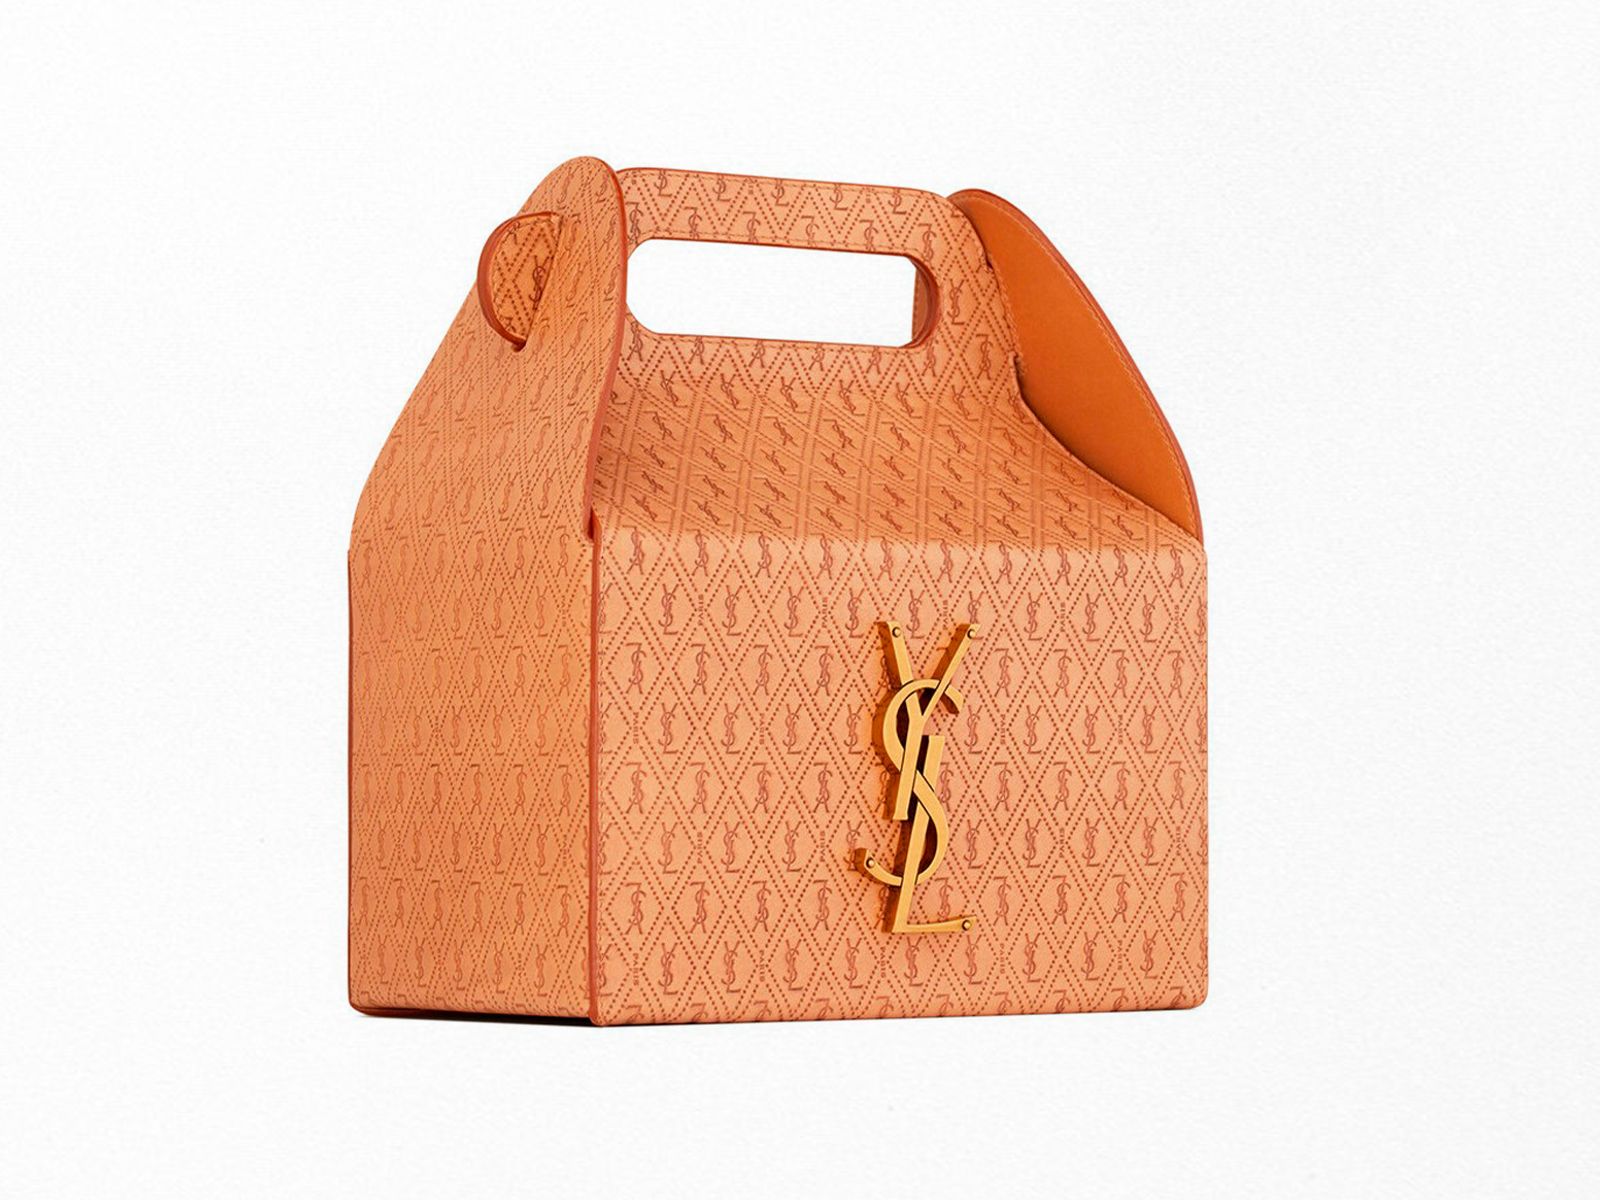 Take the leftovers from your favorite restaurant with you in the new Saint Laurent bag